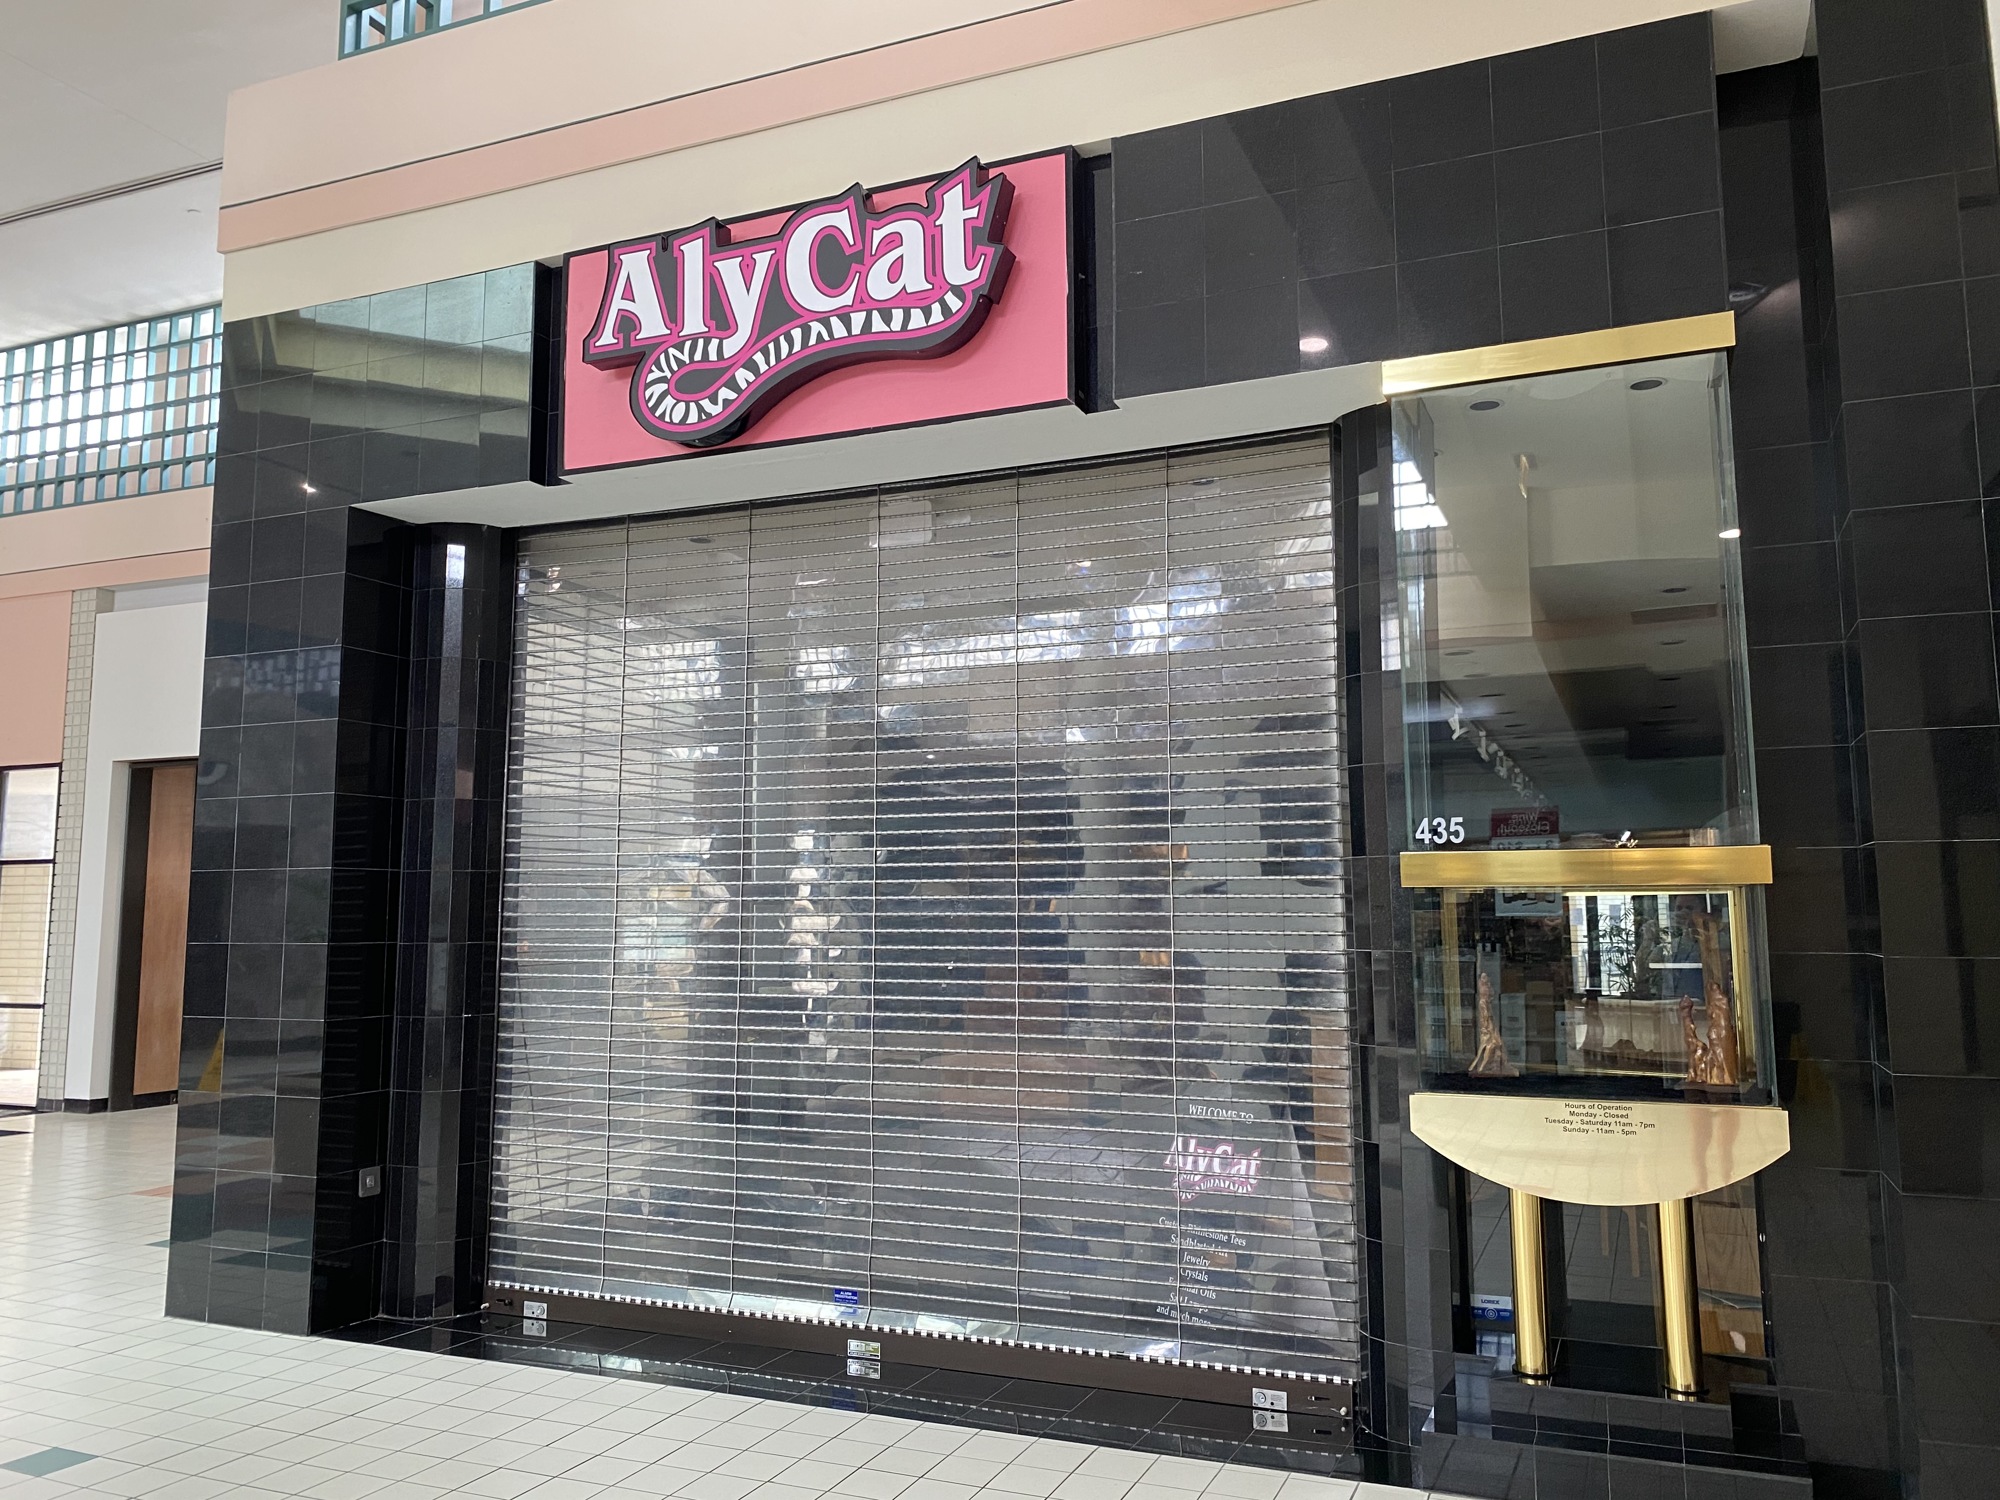 The closed AlyCat store at Regency Square Mall.